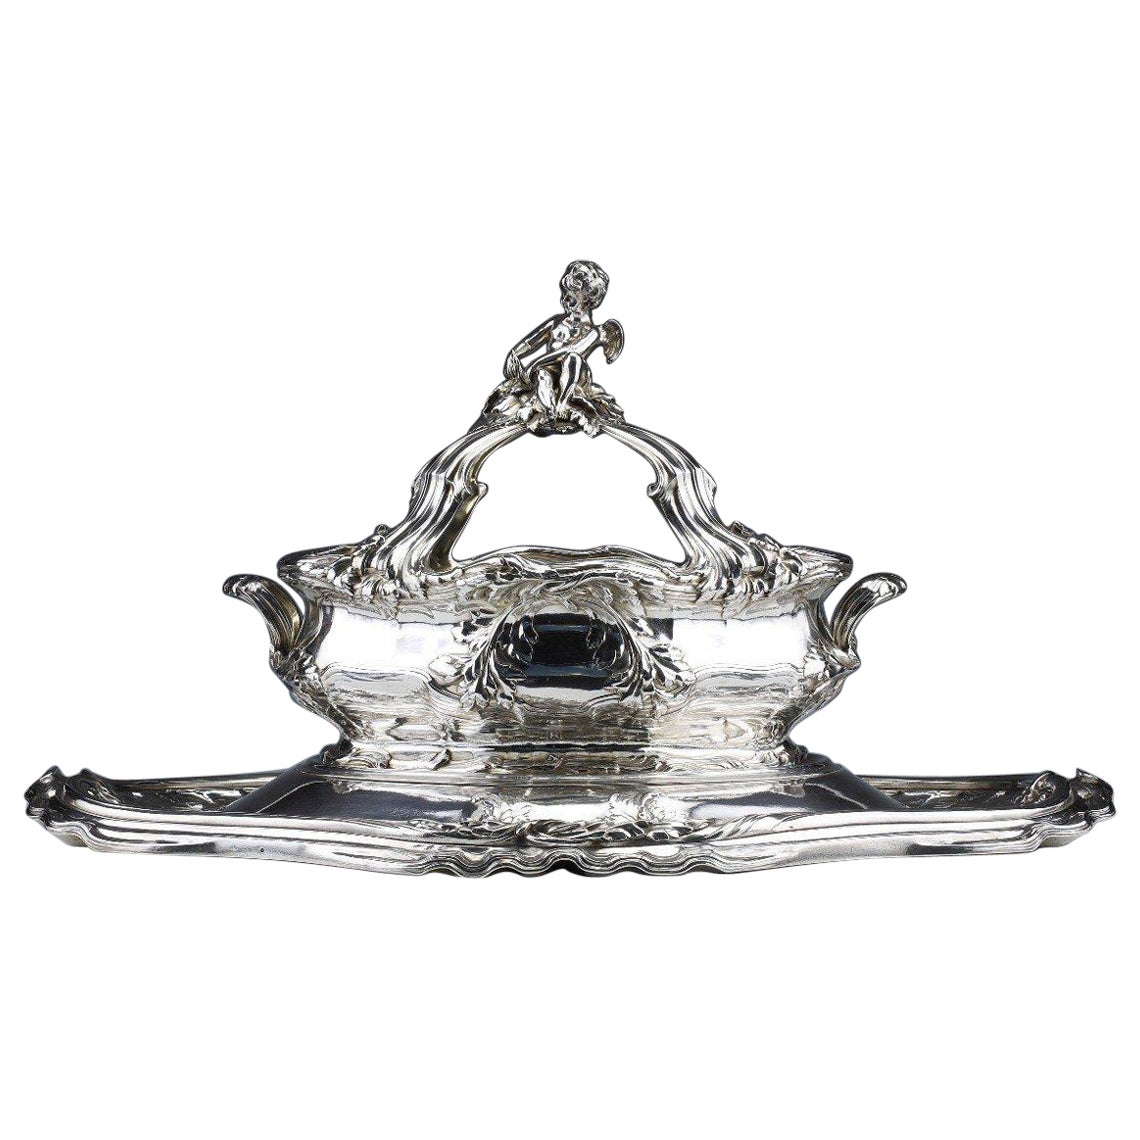 Risler & Carre - Important Table Centerpiece In Sterling Silver XIXth Century For Sale